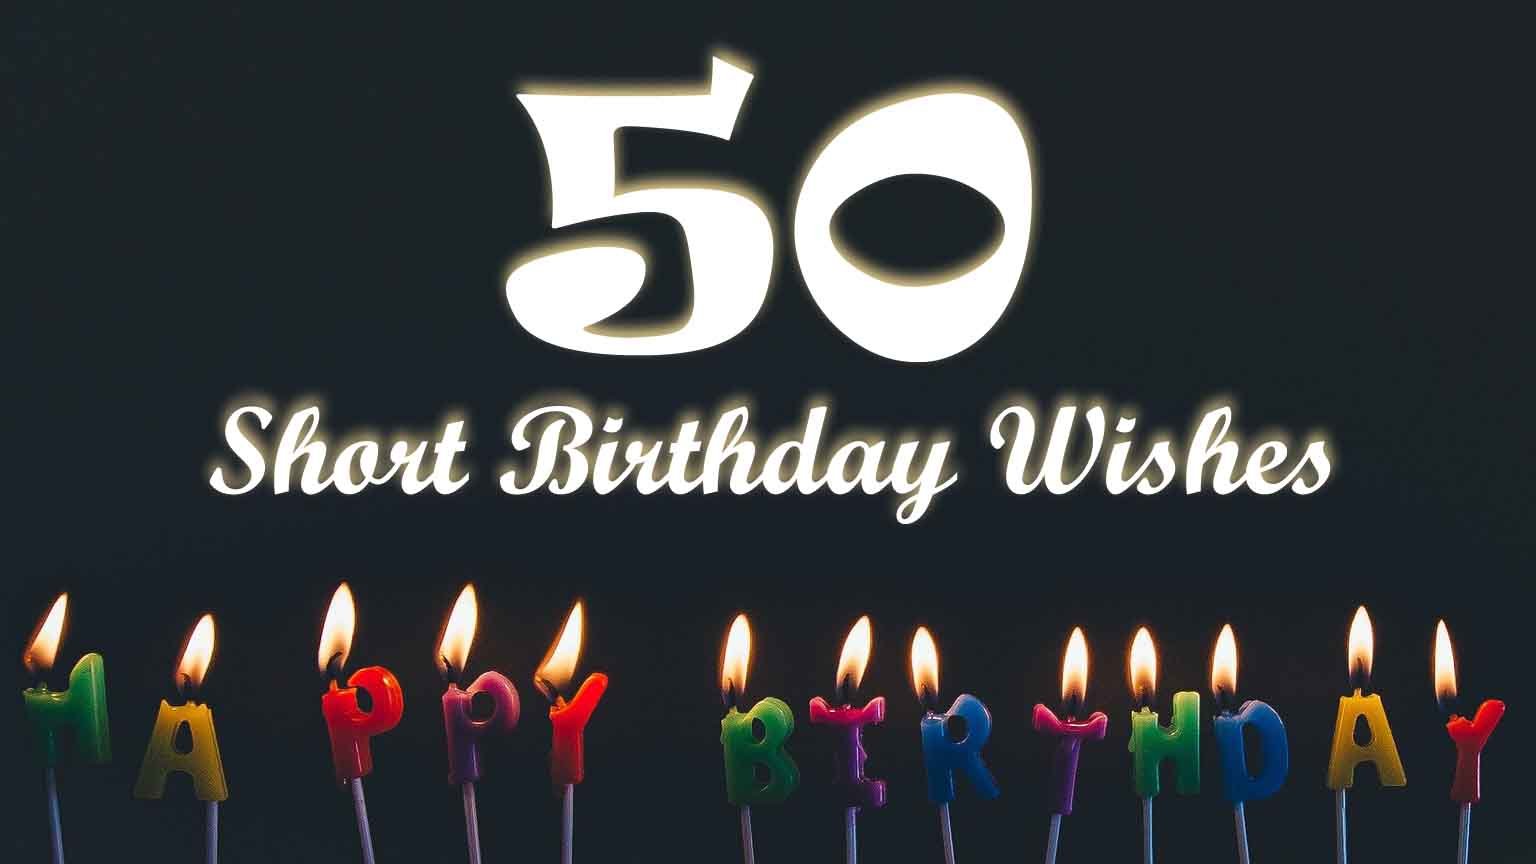 Happy Birthday! 50+ Short Birthday Wishes Messages & Quotes